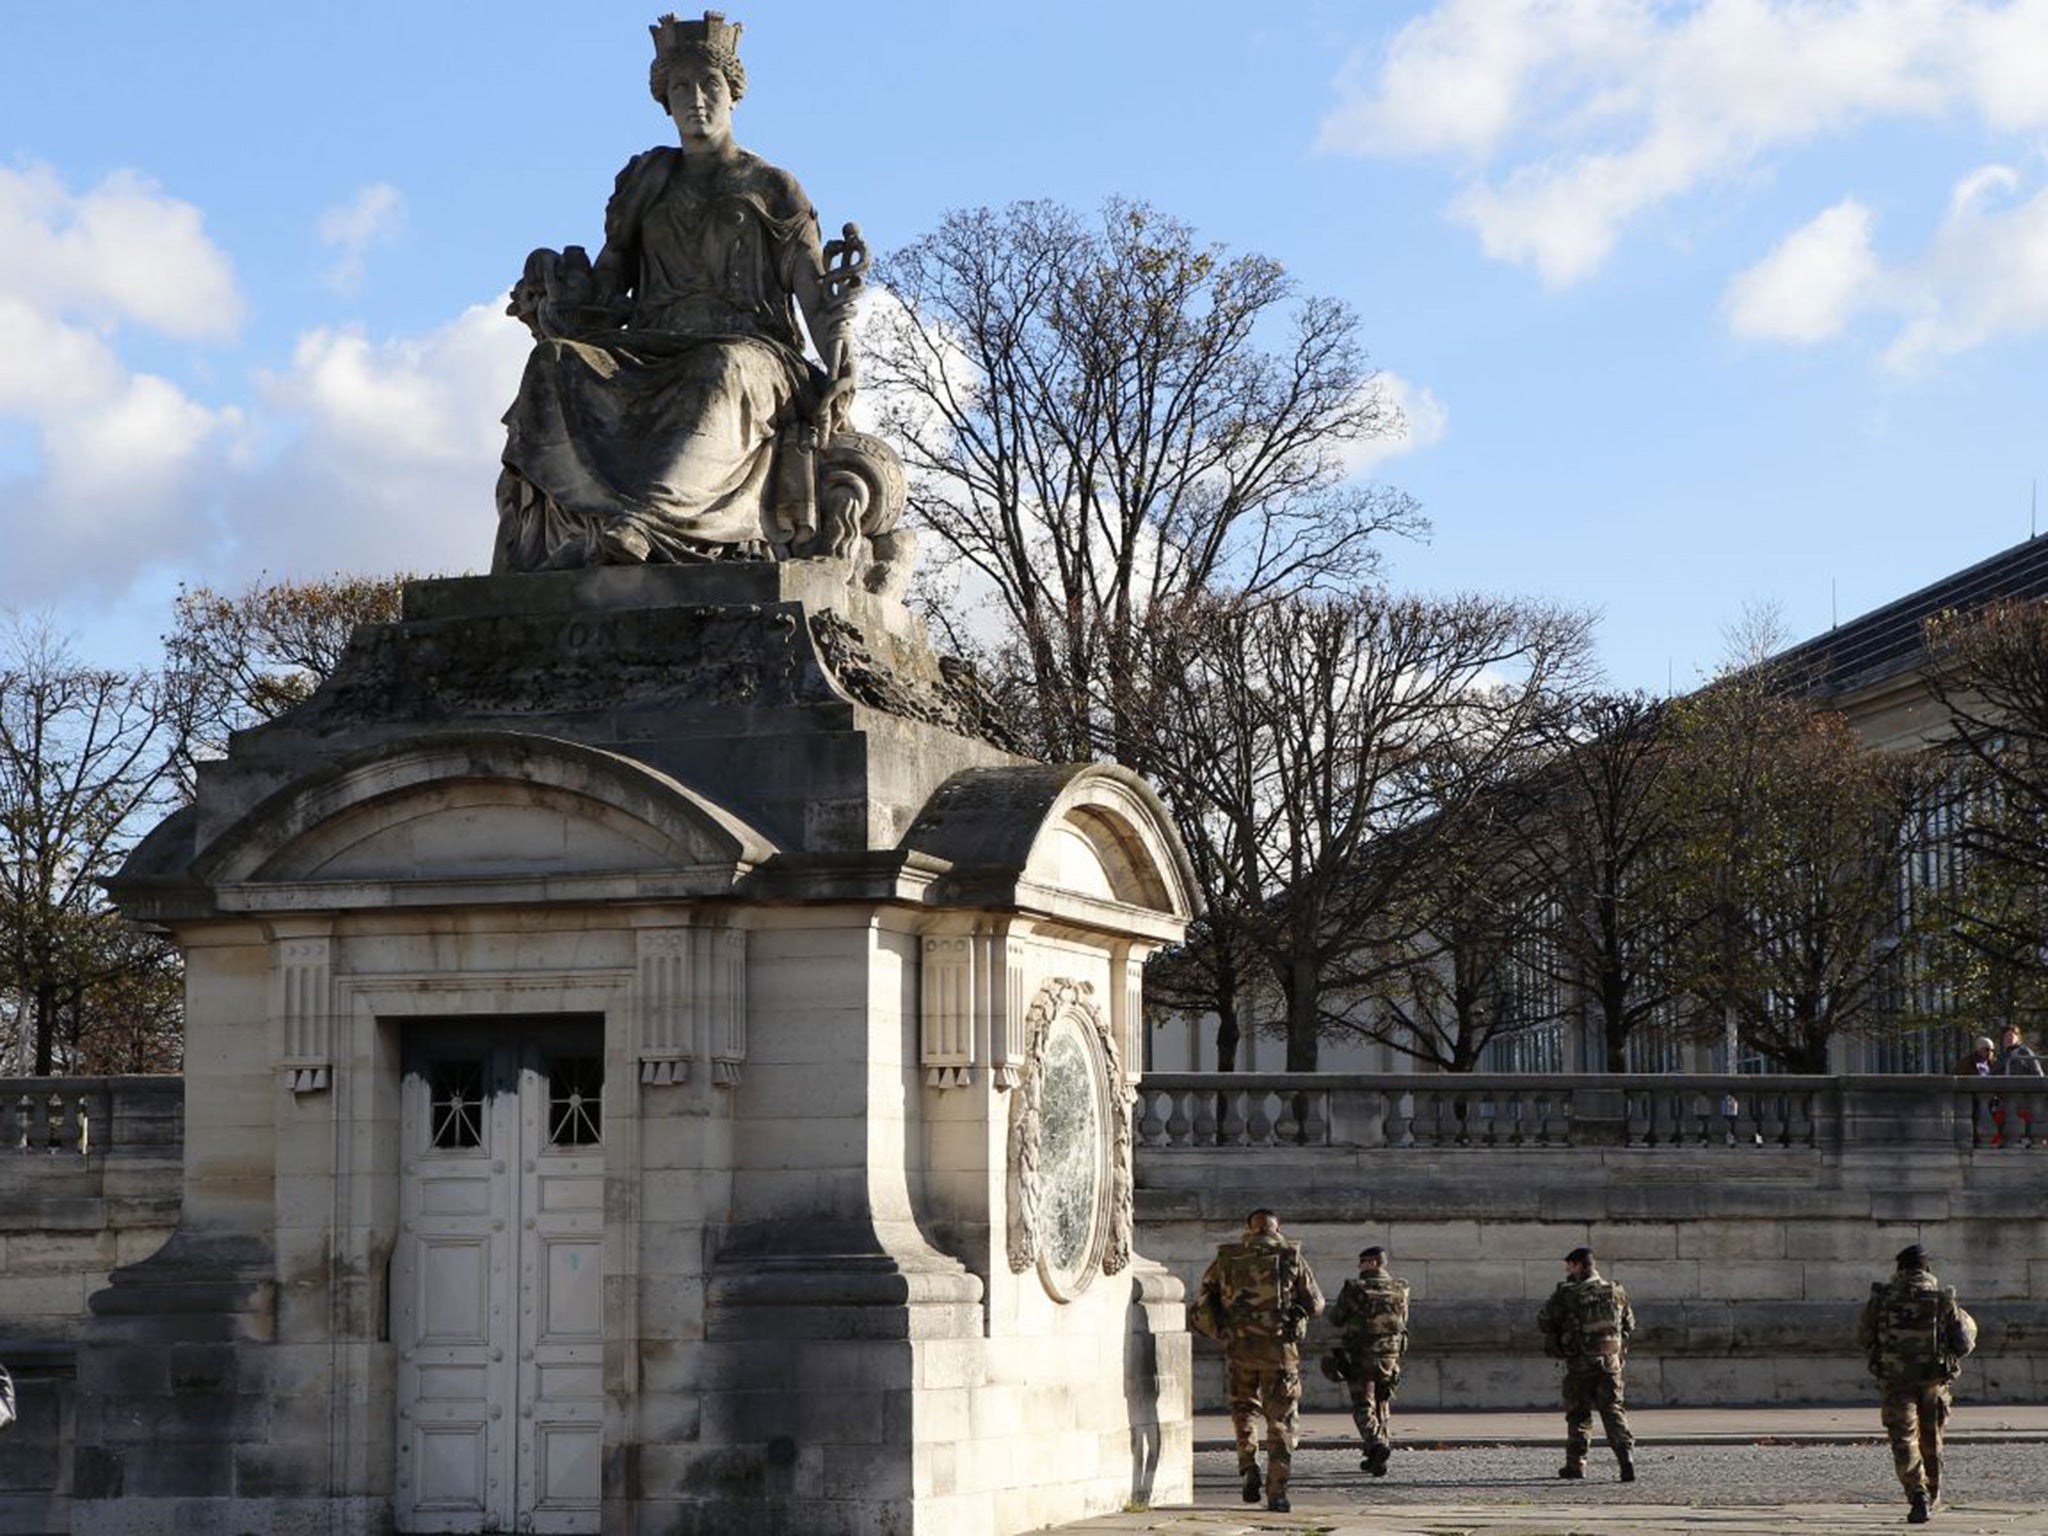 French soldiers patrol in Concorde Plaza closed to the Champs Elysees, in Paris